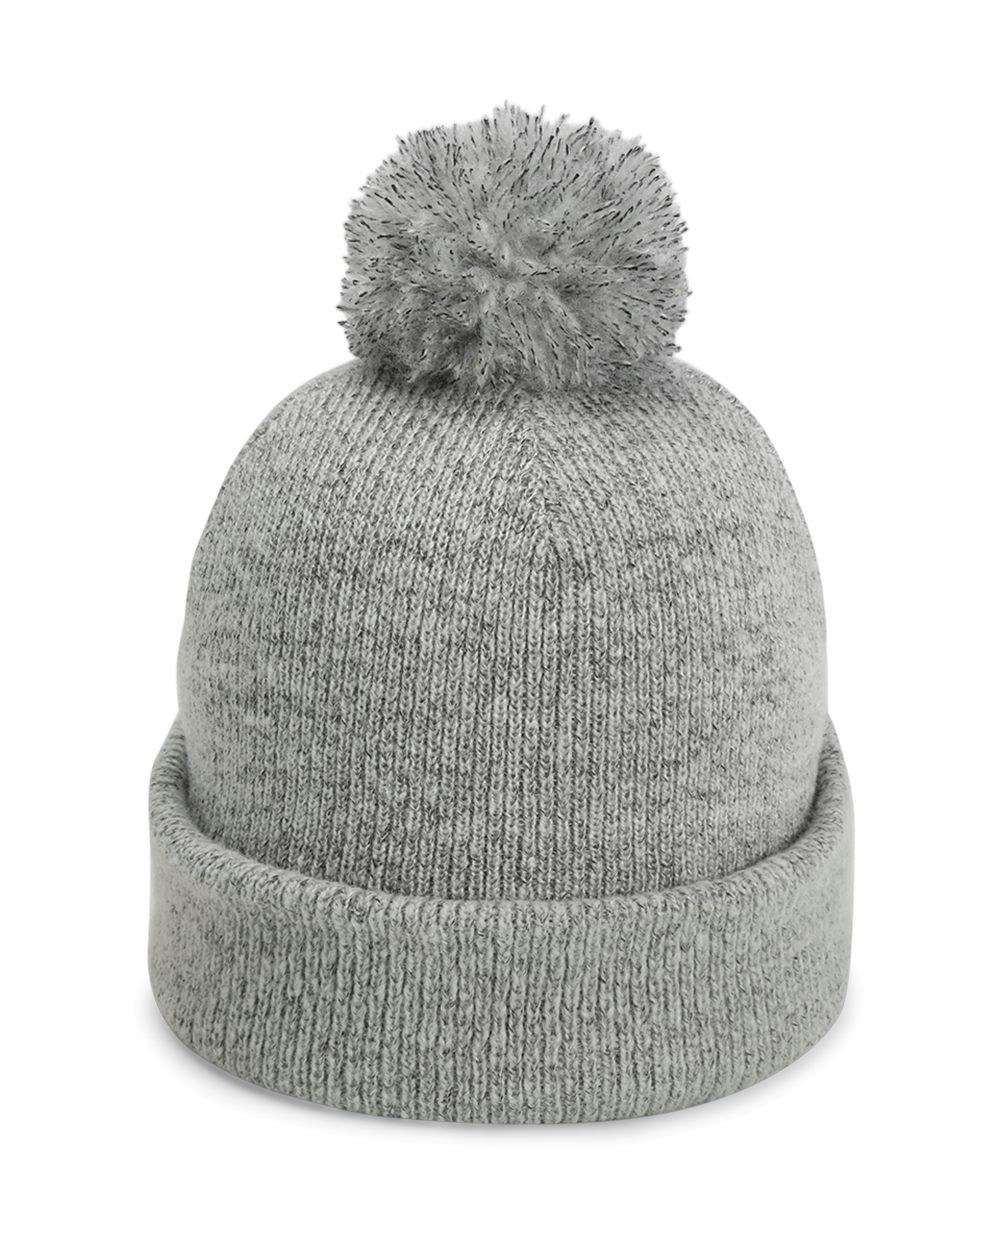 Image for The Mammoth Cuffed Beanie - 6015